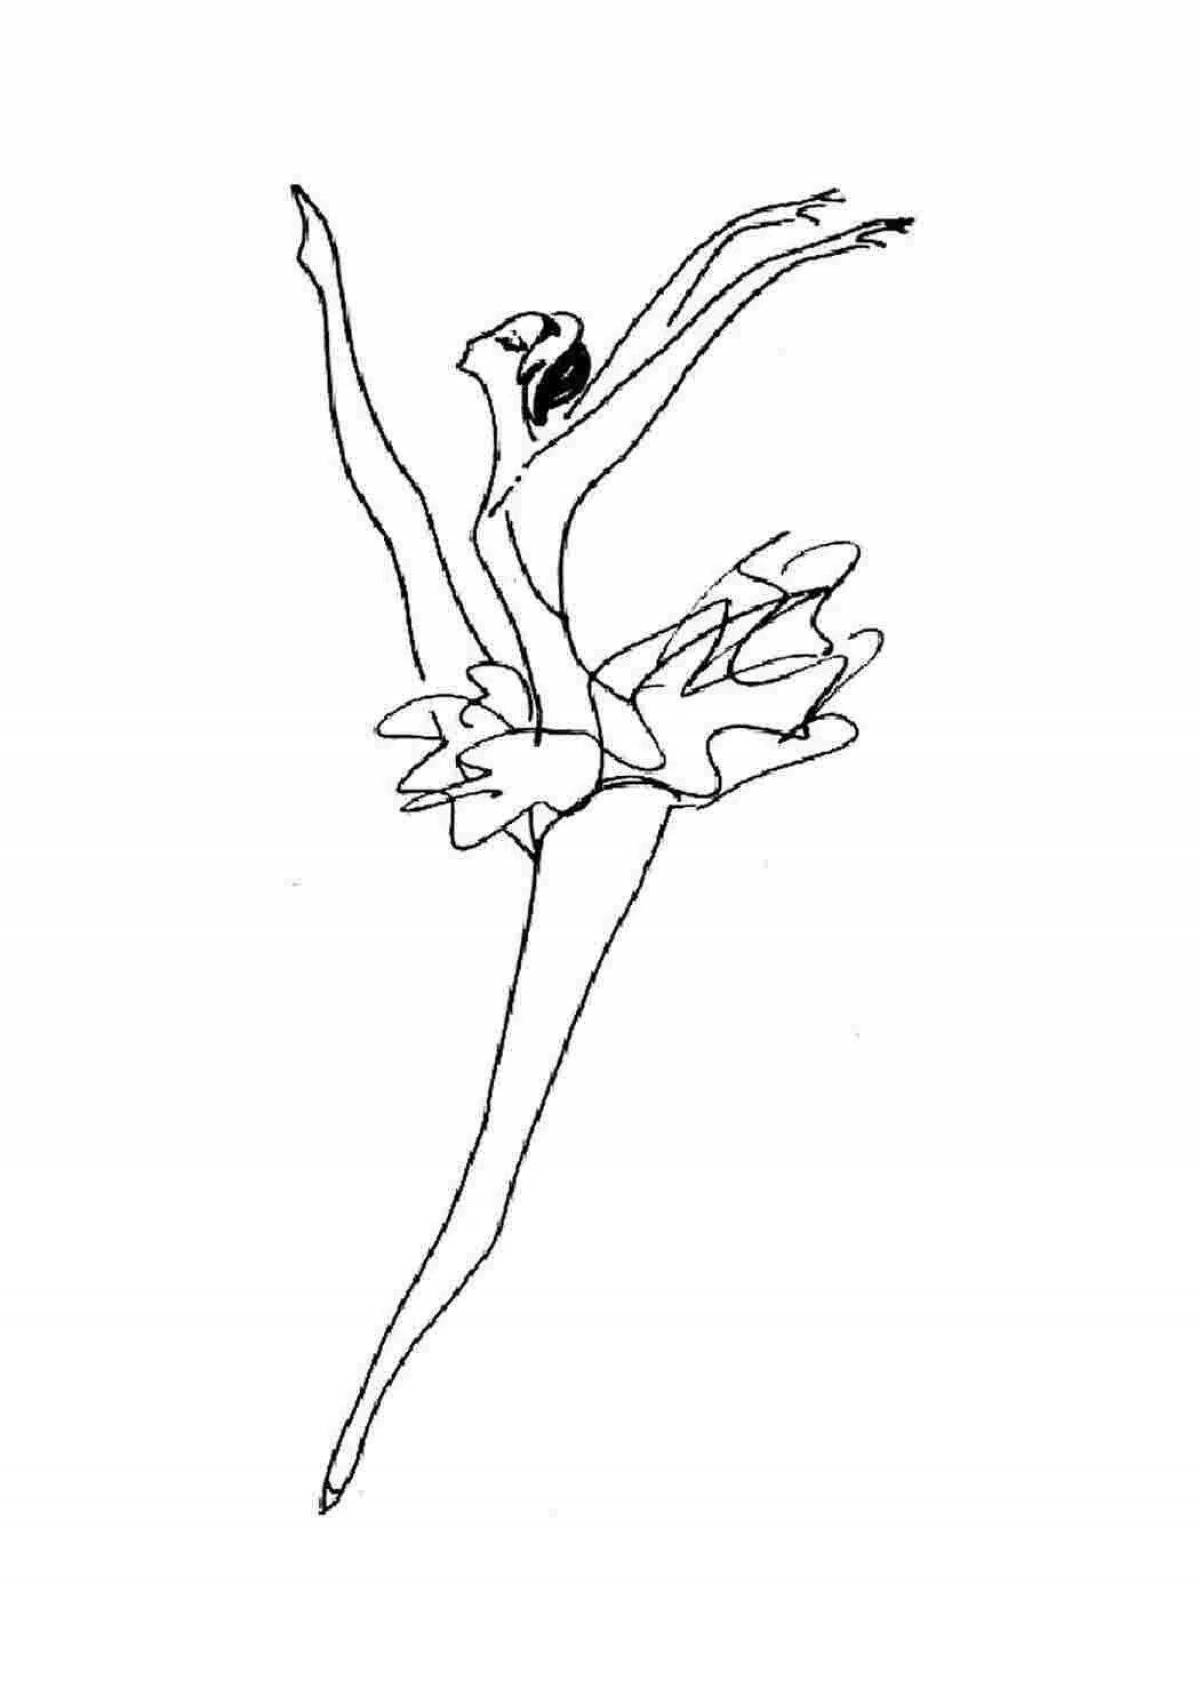 Coloring page gorgeous ballerina